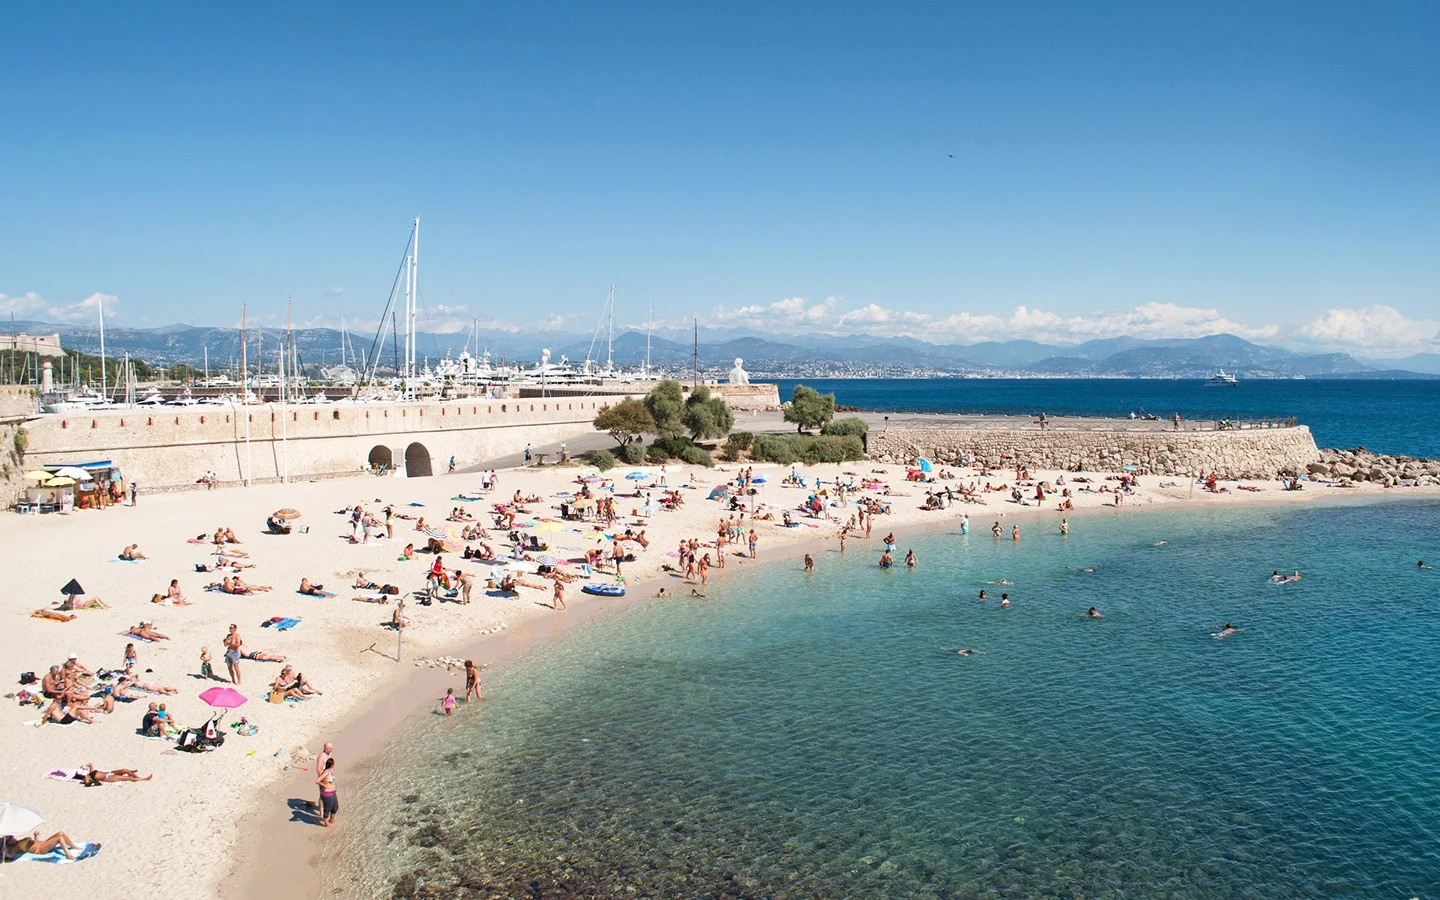 Relaxing on the Plage de la Gravette beach, one of the best things to do in Antibes